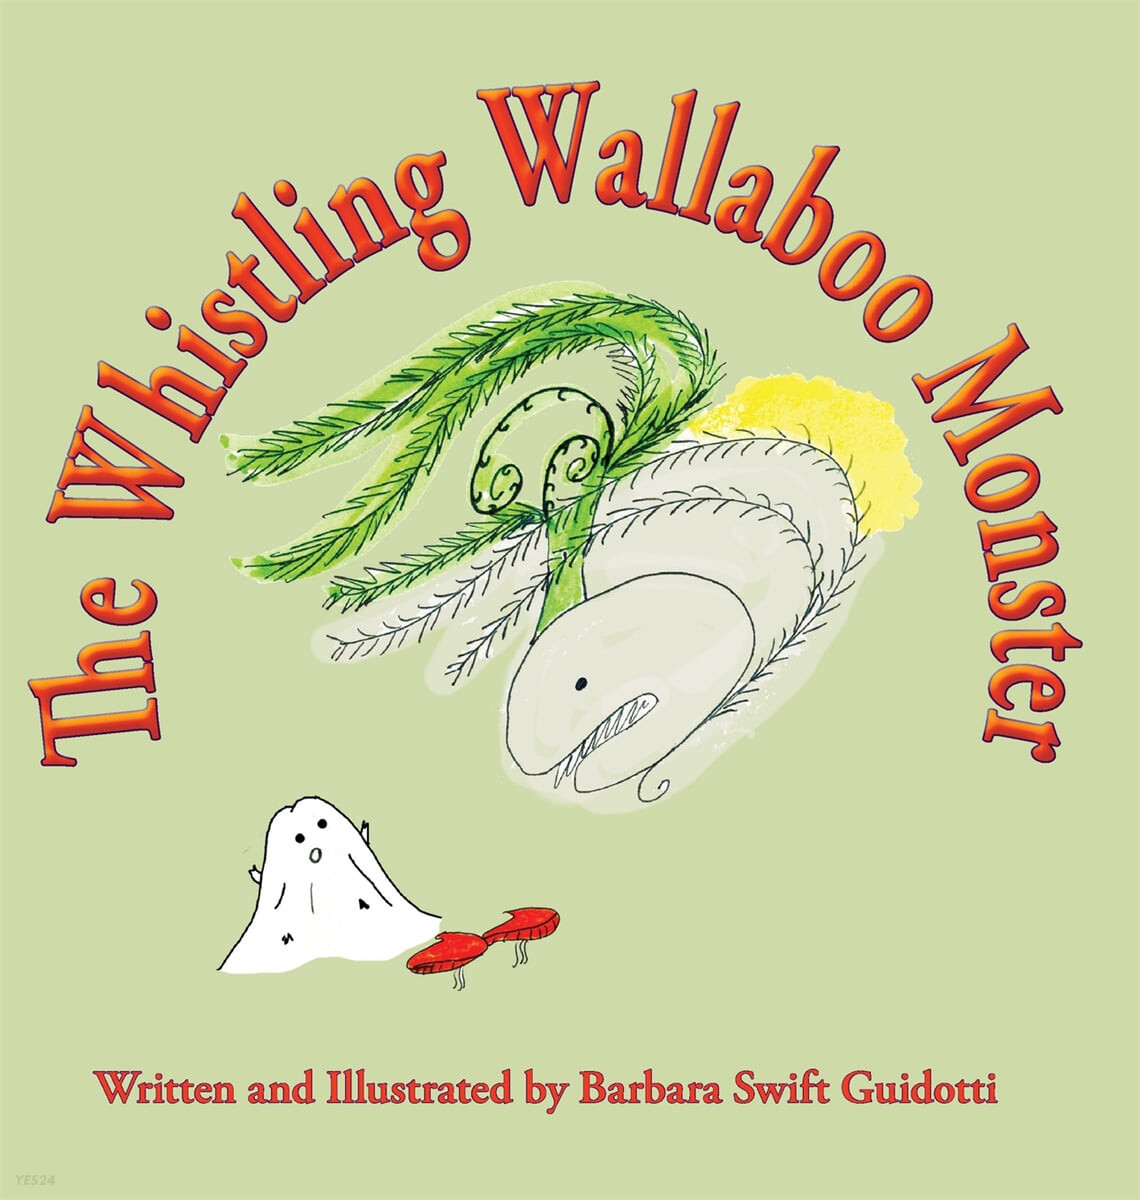 (The) Whistling wallaboo monster 